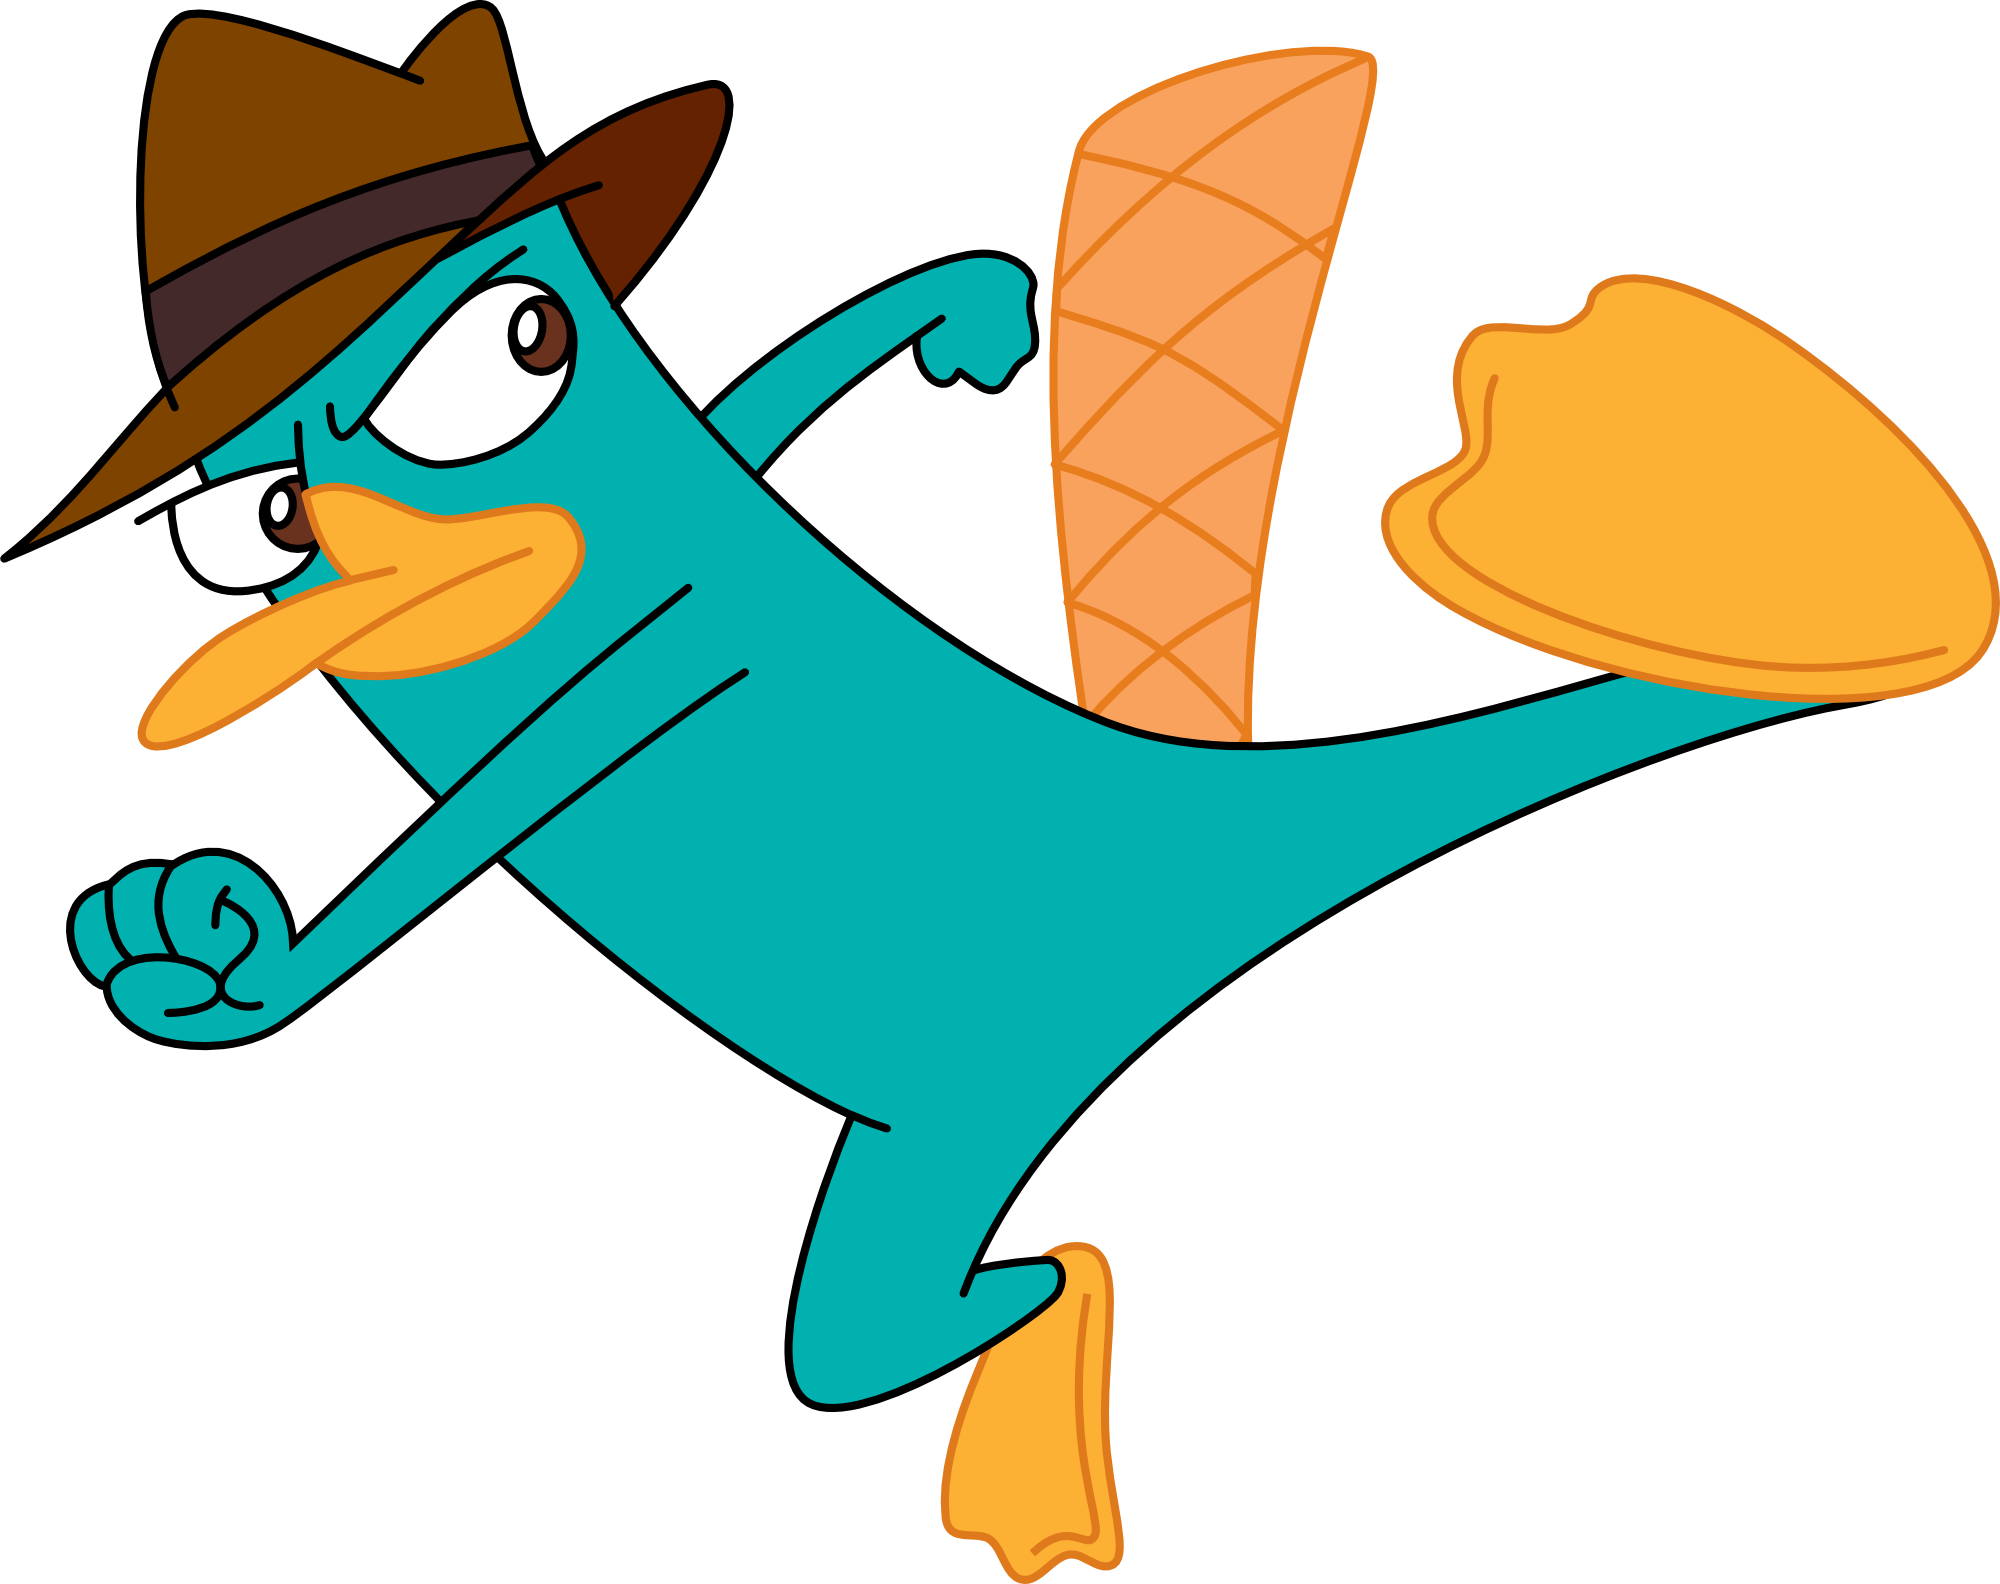 perry platypus cartoon knockout